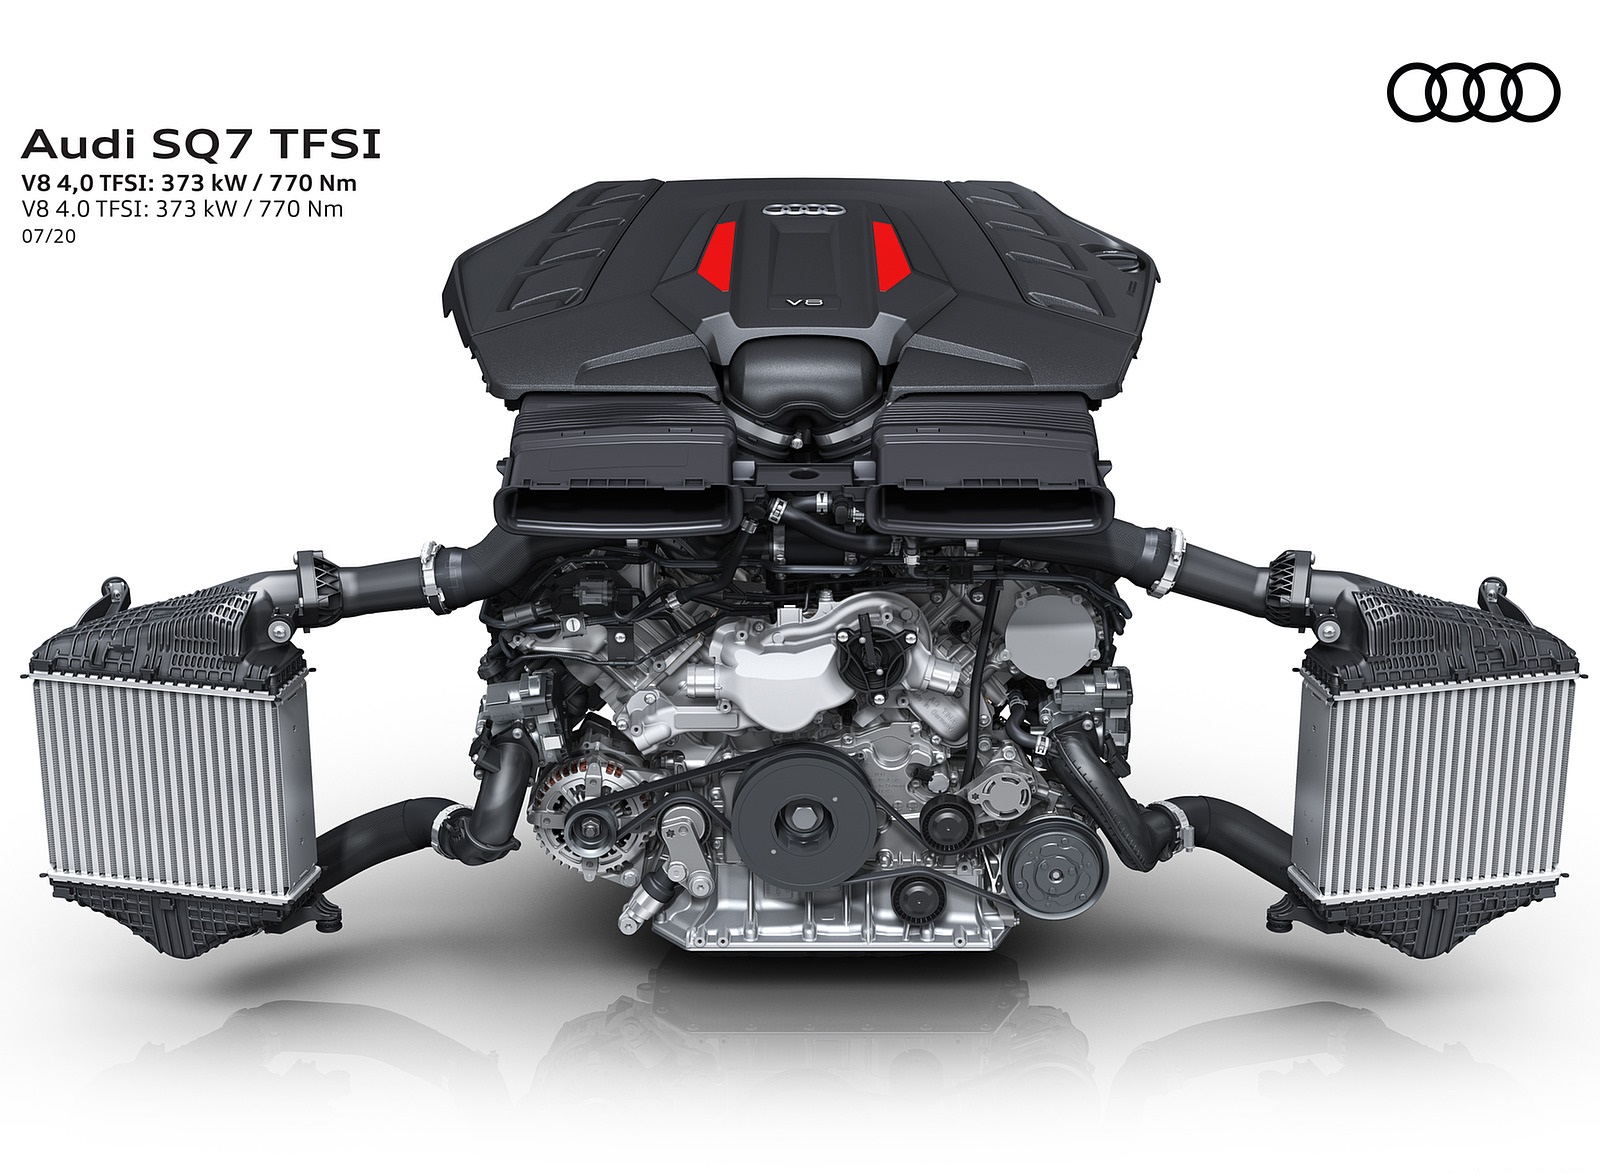 2021 Audi SQ7 V8 4.0 TFSI : 373 kW / 770 Nm Wallpapers #62 of 65